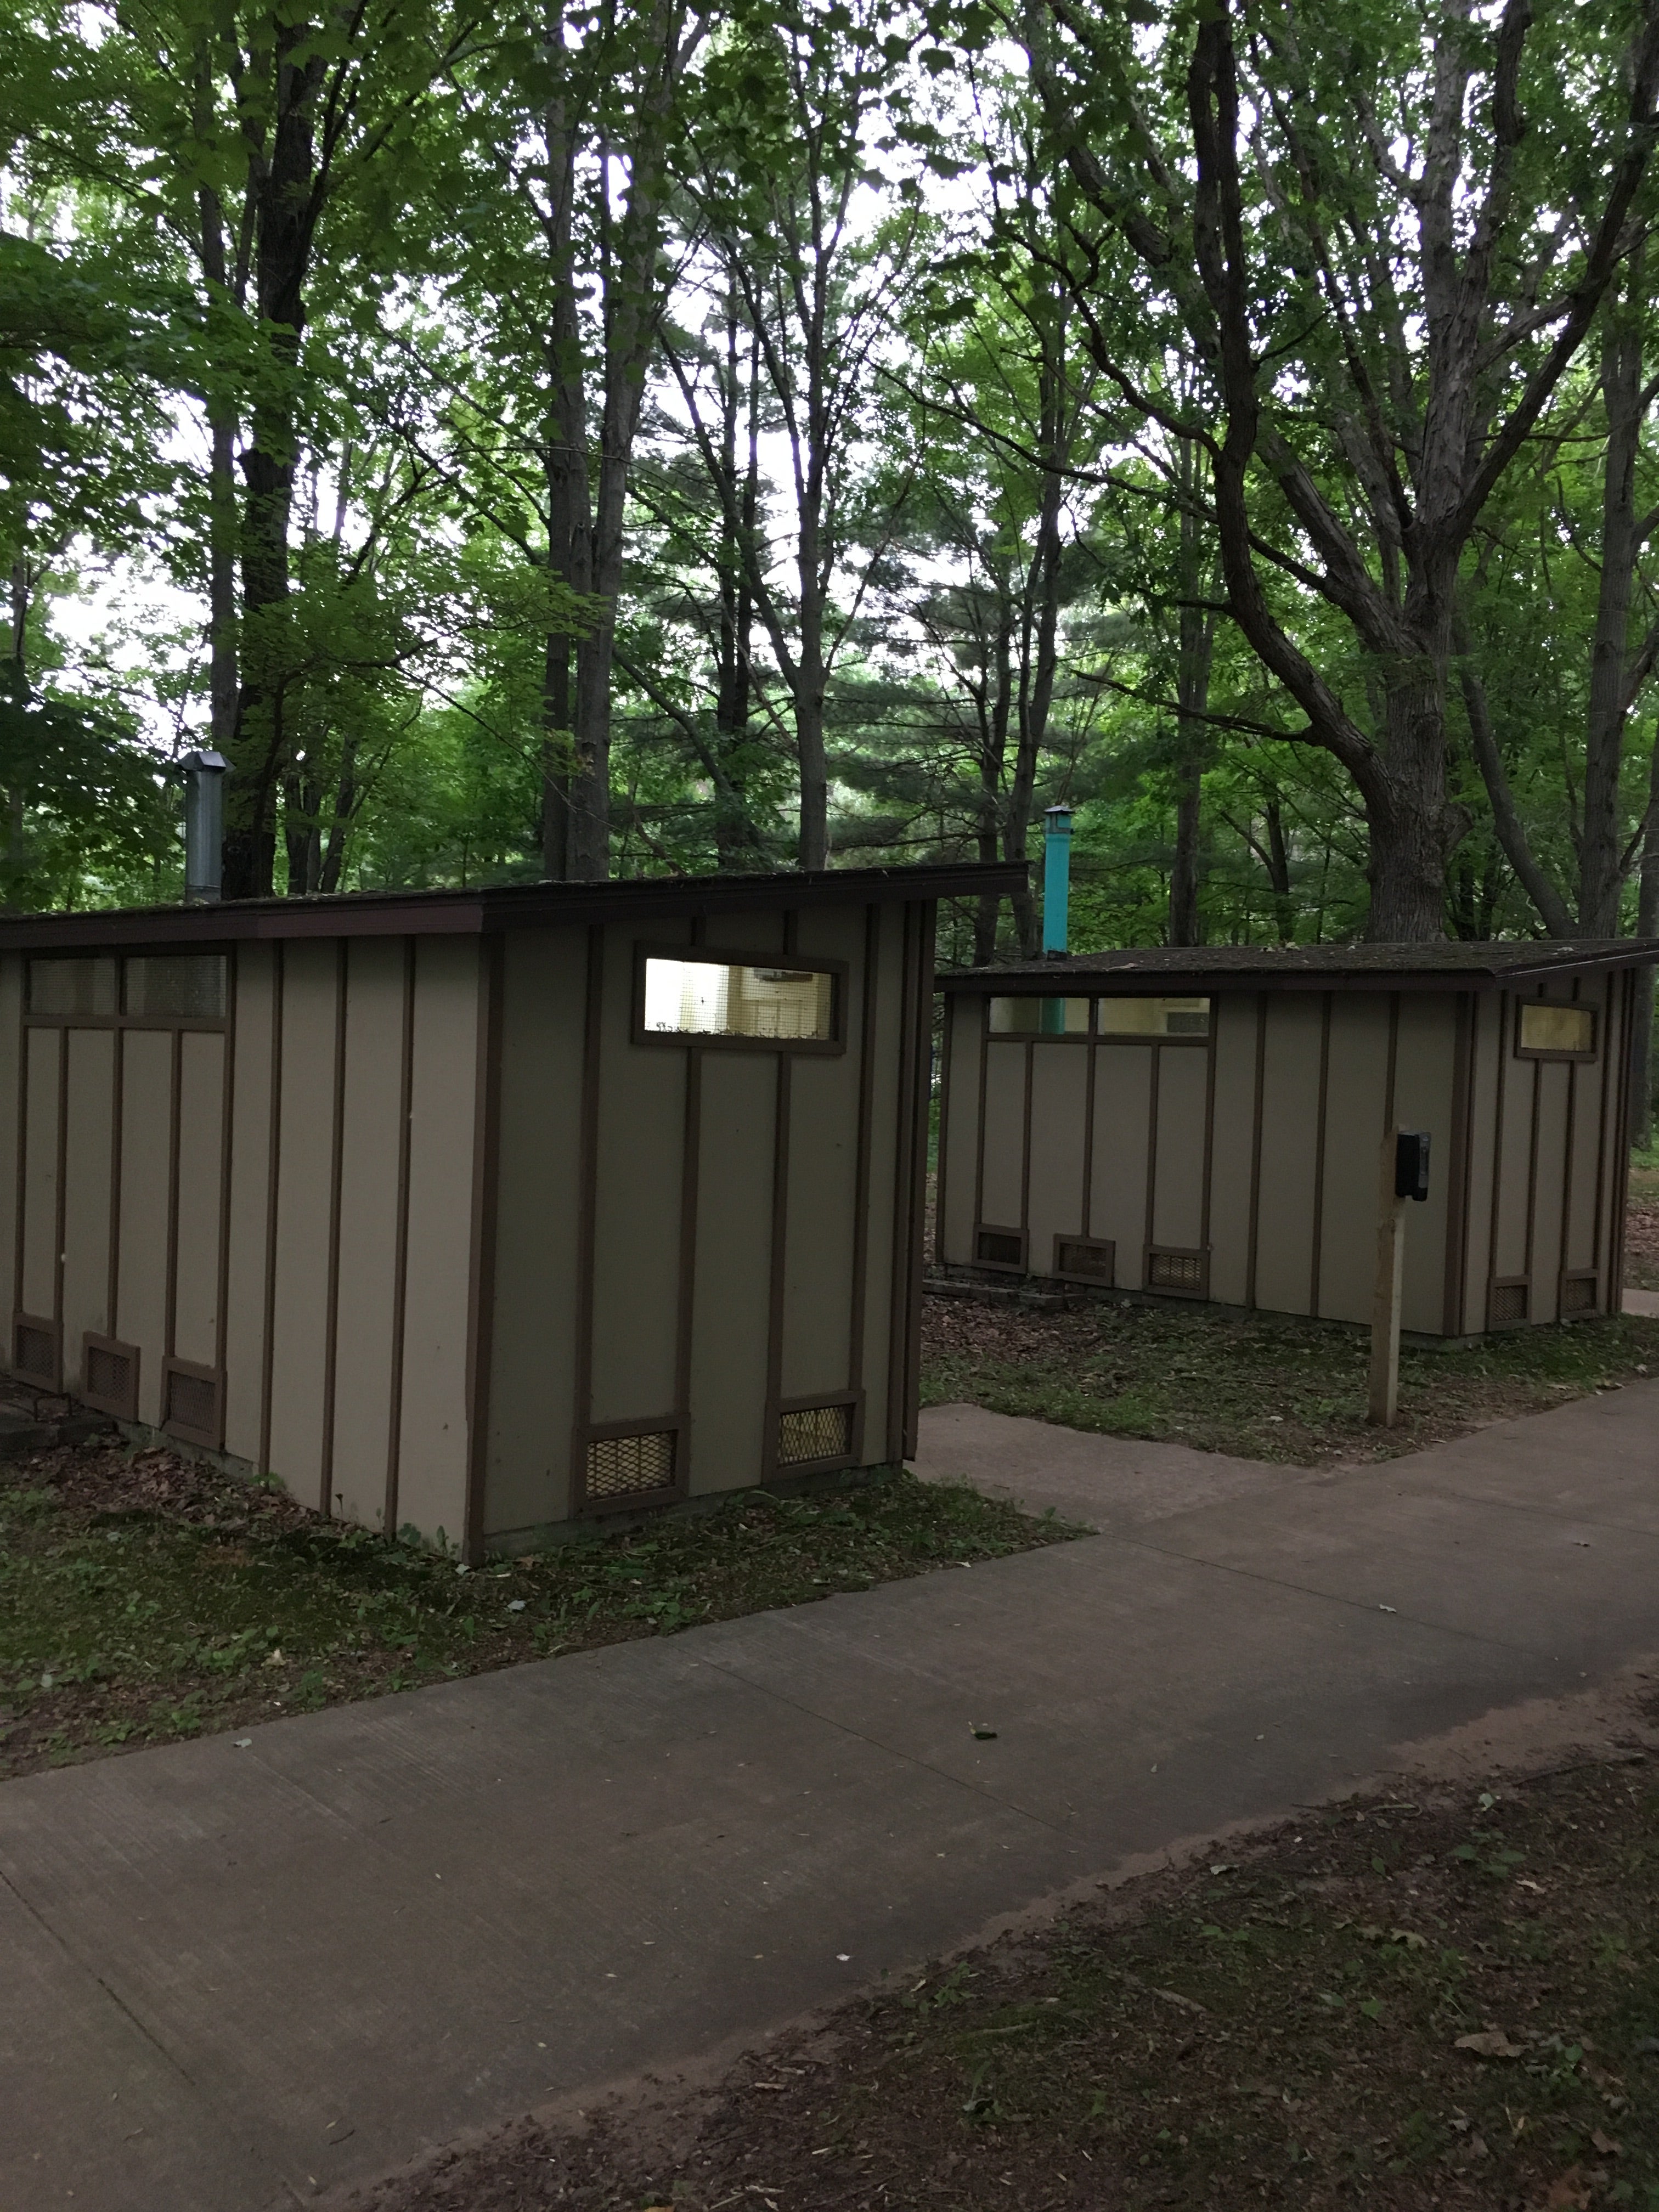 Odd little bathrooms on the far edge of the campground by the docks in need of major updating